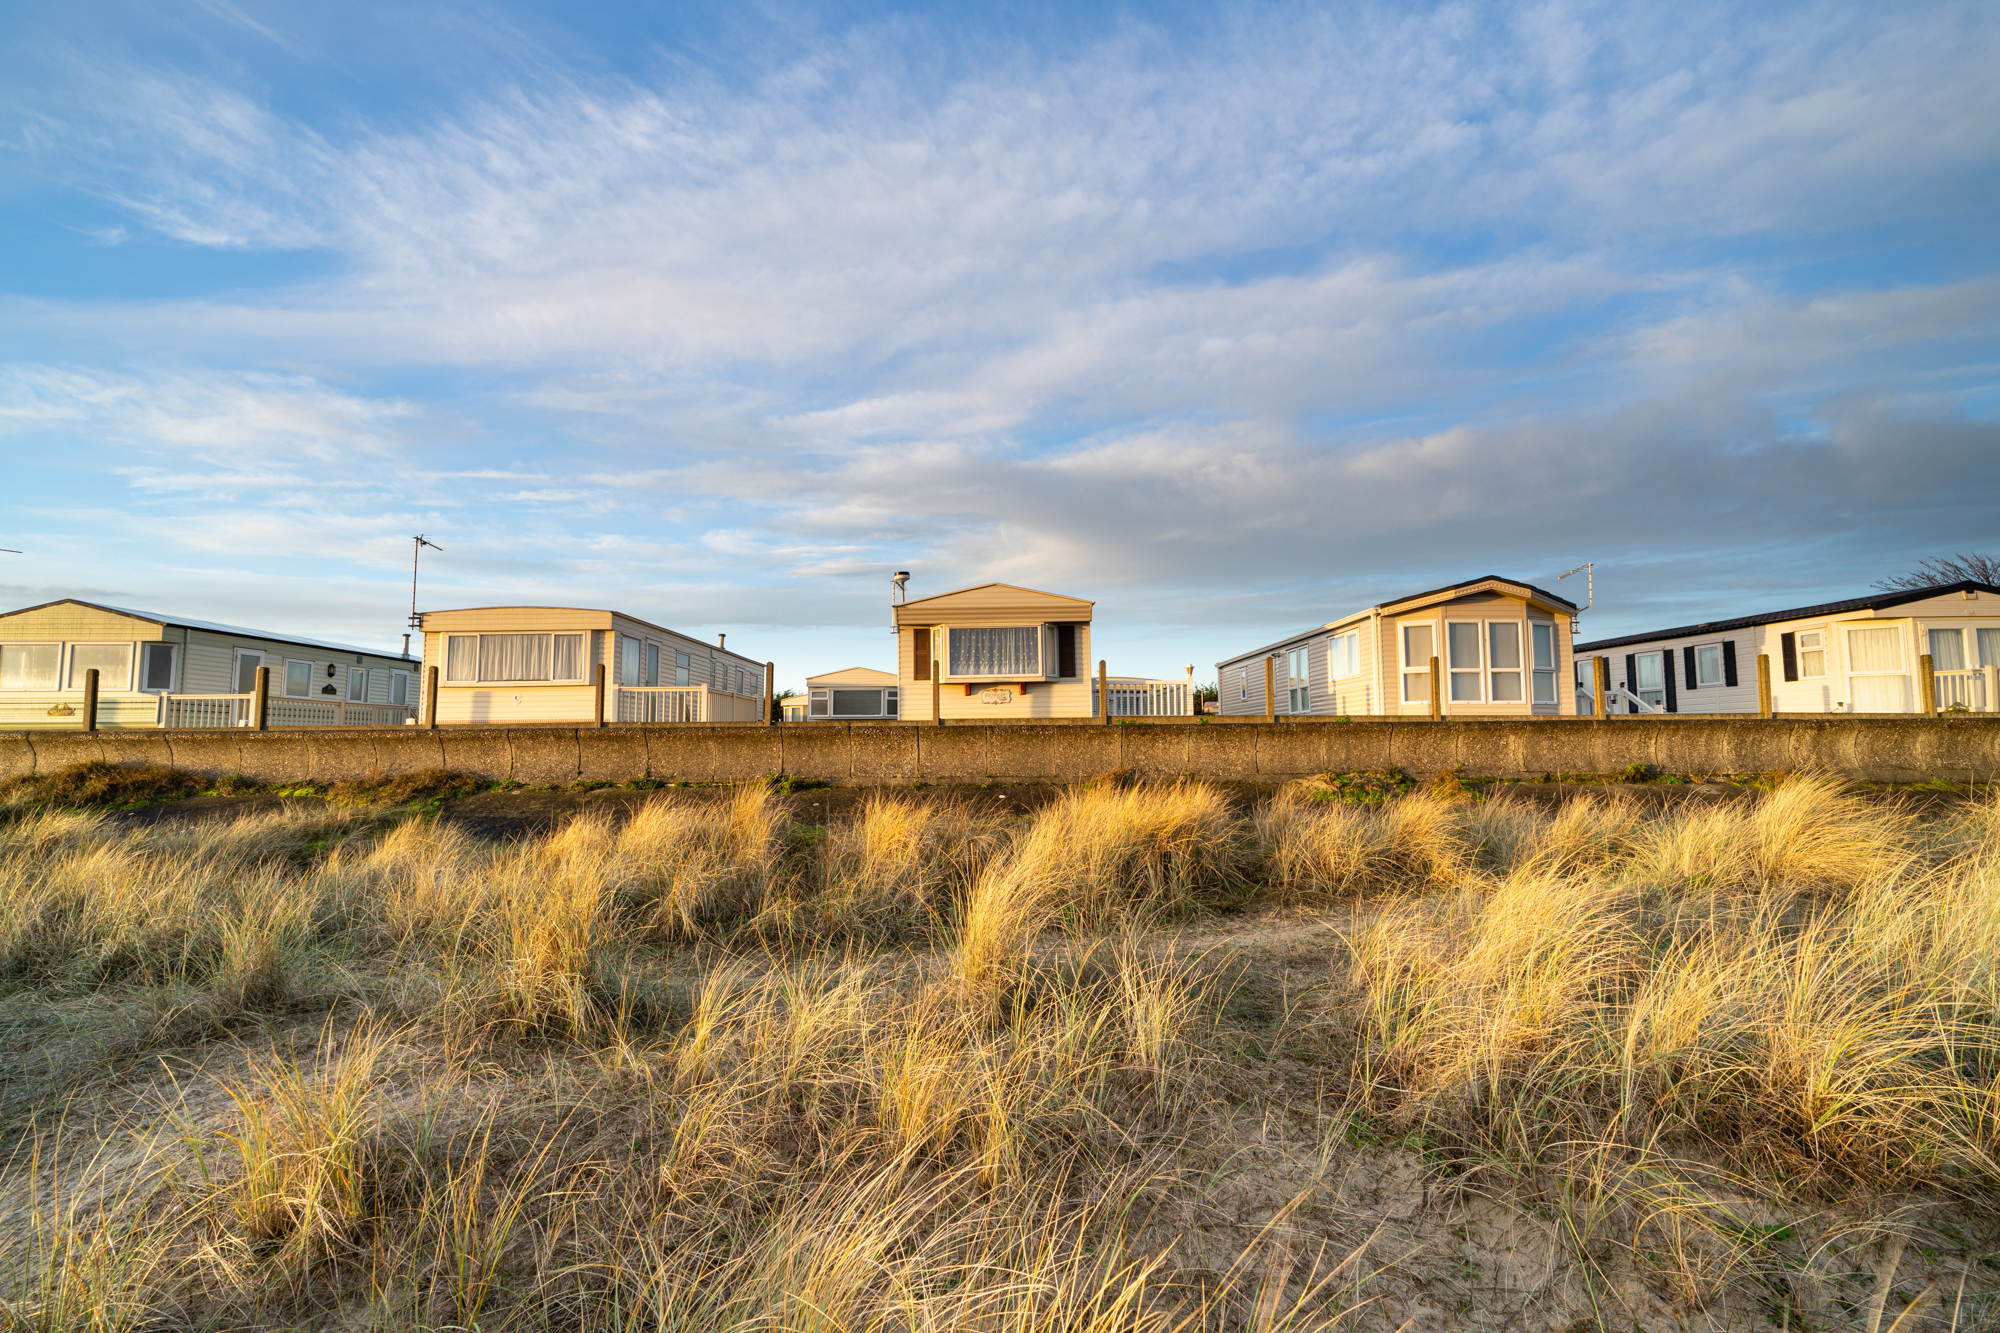 Beach homes in the sun taken with the Sony A7R V